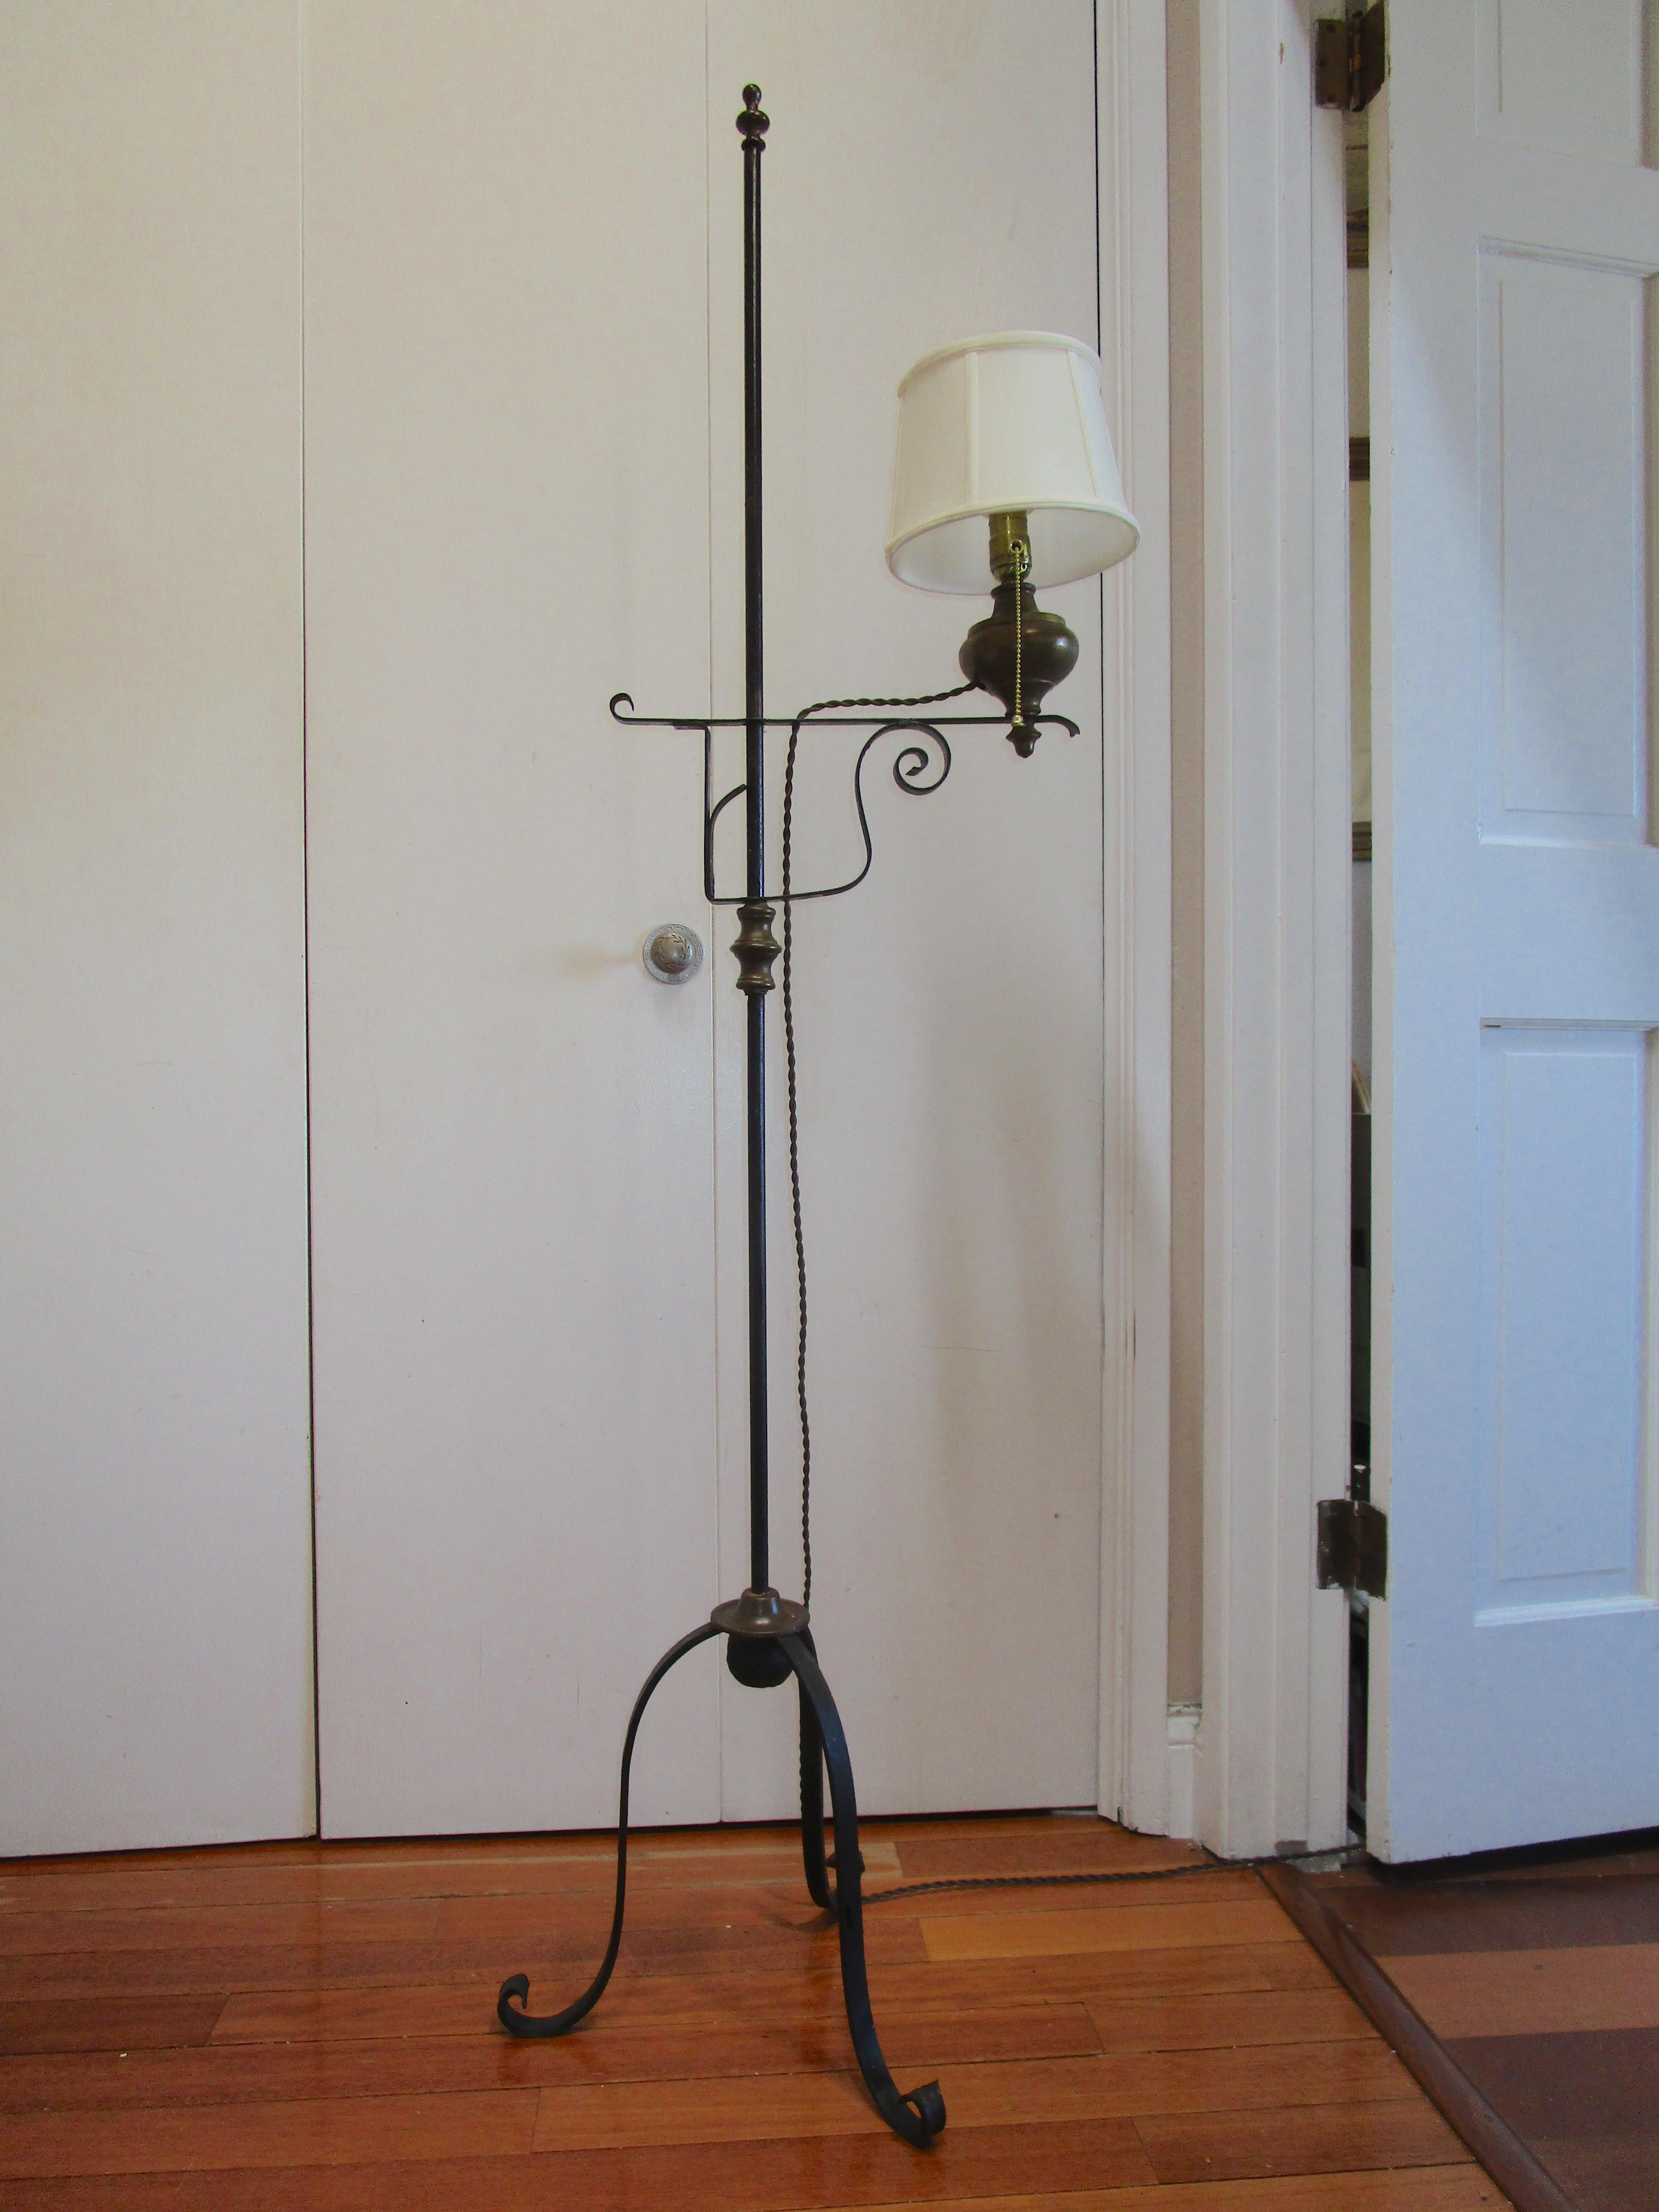 This is a striking tripod base wrought iron lamp. The oil reservoir, the vintage style cord and the tripod that rests on scrolled feet make it a standout. This is a vintage Colonial style wrought iron tripod scrollwork adjustable floor lamp from the